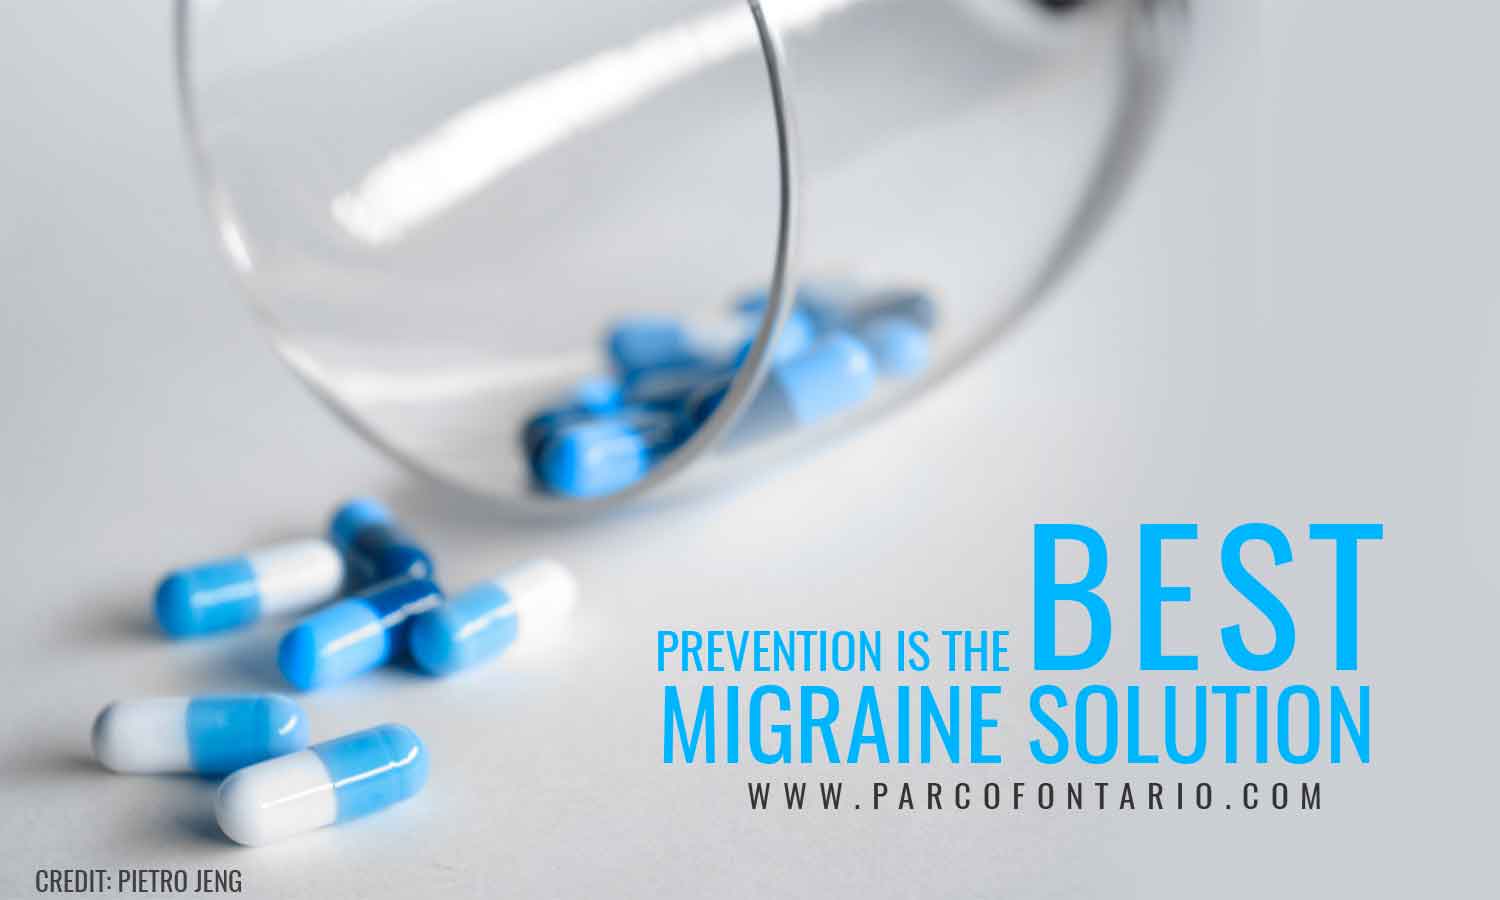 Prevention-is-the-best-migraine-solution